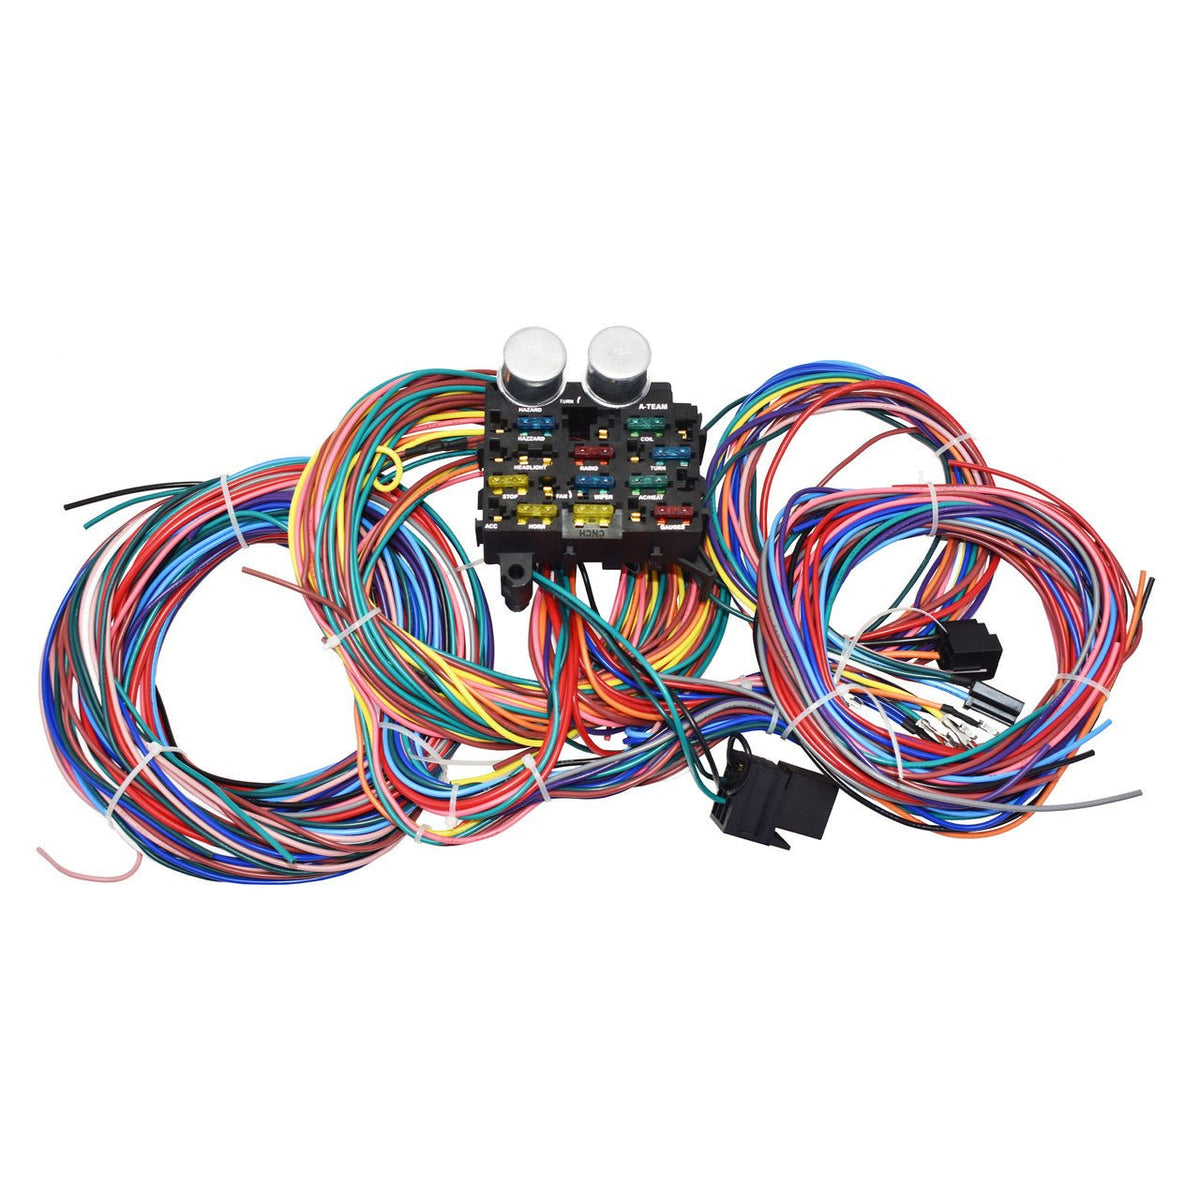 A-Team Performance - 21 Standard Circuit Universal Wiring Harness Kit -  Muscle Car Hot Rod XL Wire